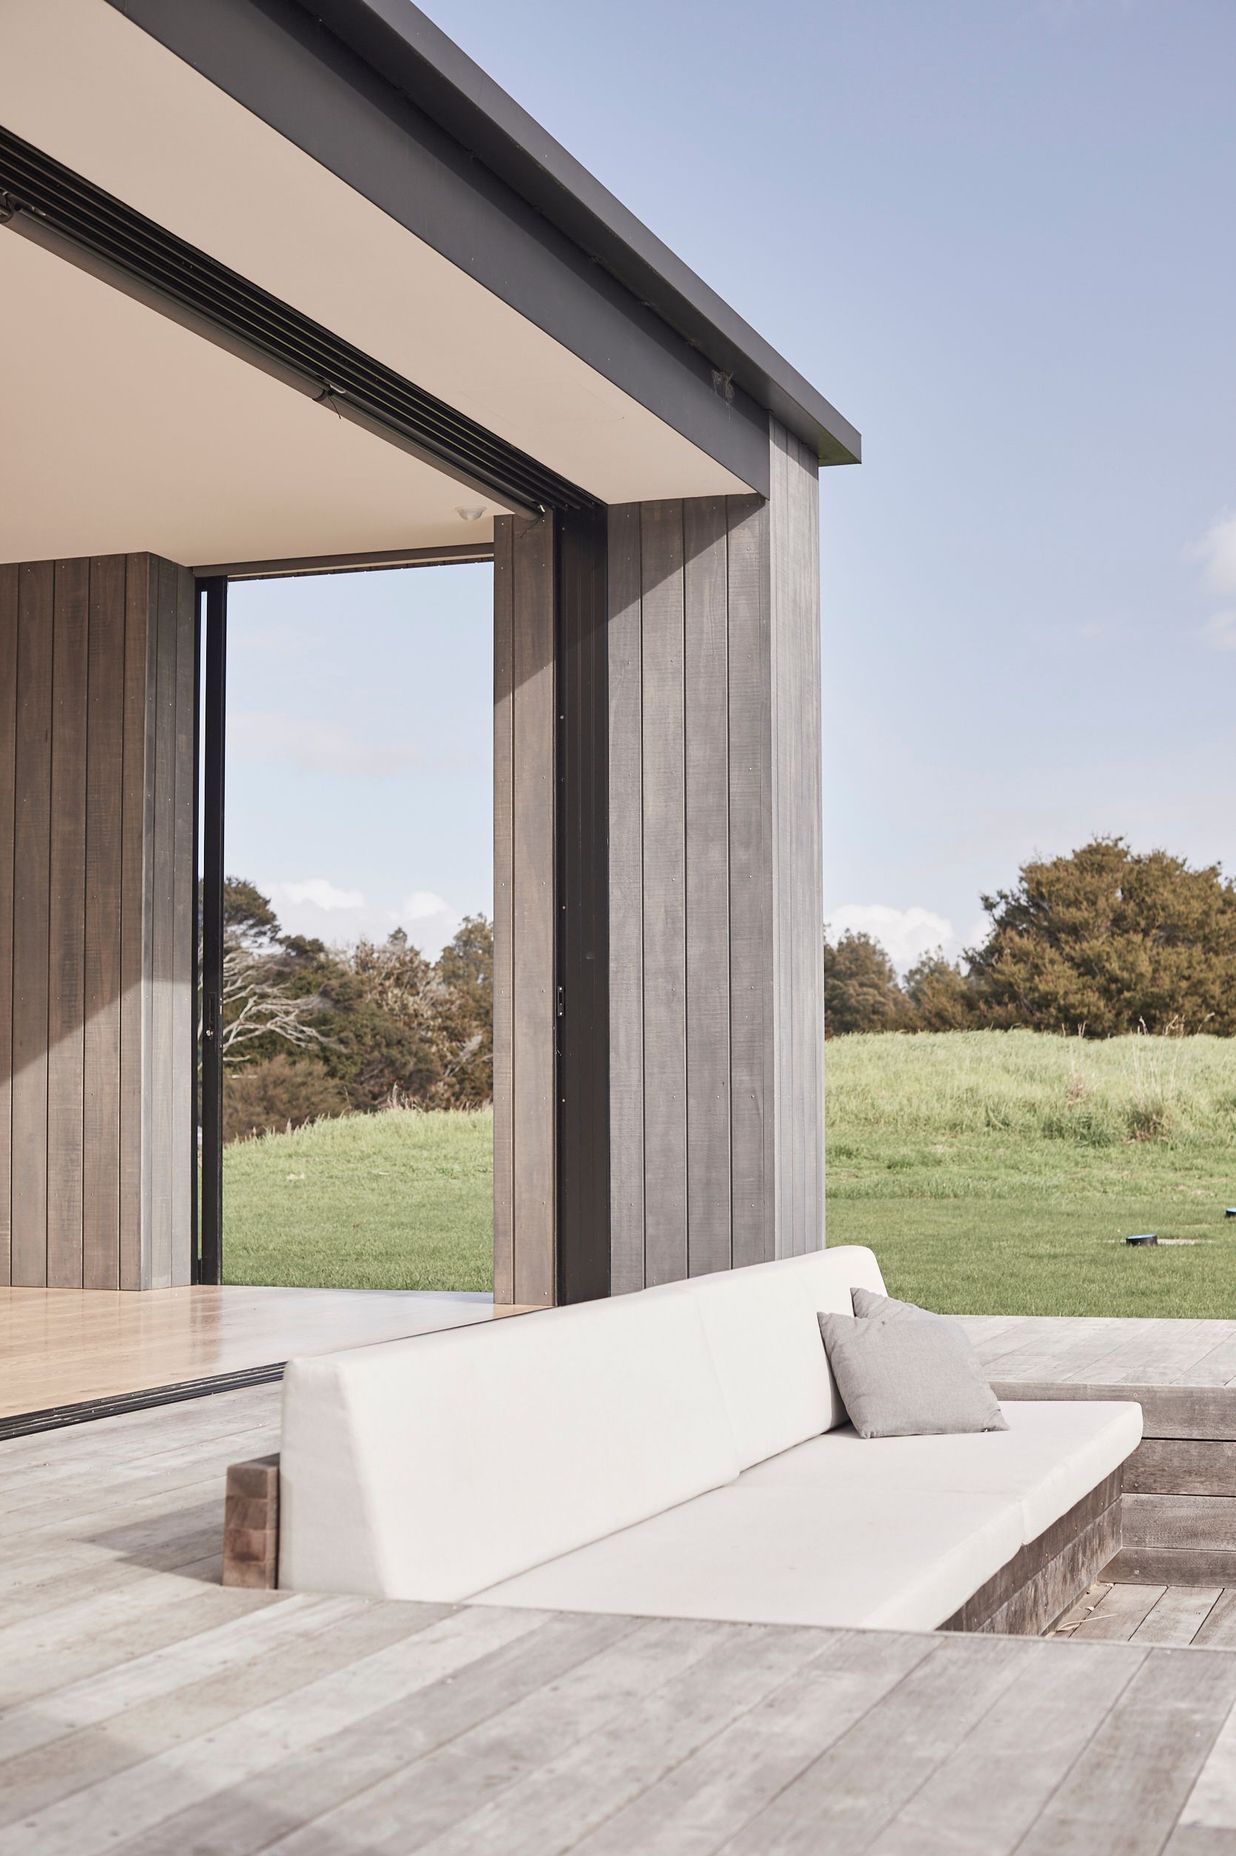 Setting the level of the main floor at the same height as the highest point of the property enabled the architect to fully maximise the entire rear half of the site and create a real connection between the house and the large outdoor entertaining area.